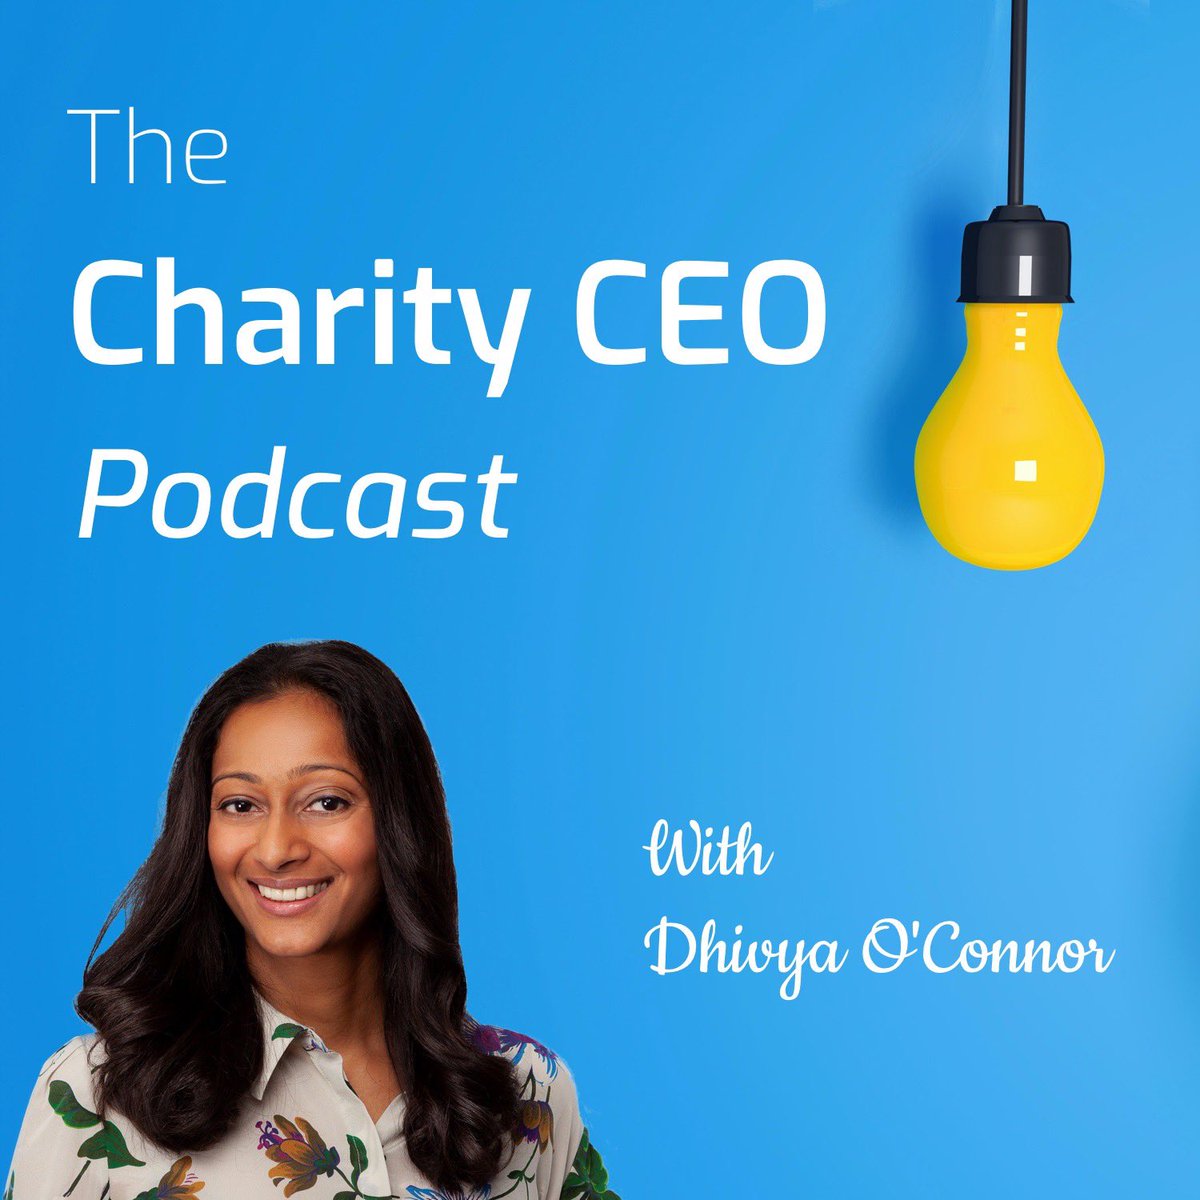 COMING SOON to a podcast platform near you! 😃 

Season 4 of #TheCharityCEOPodcast releases Monday 6th June.

“Believe in yourself. Believe that you do have the power to make the change” - The #inspirational @SuzEhlers CEO @MalalaFund 

Seasons 1, 2 & 3 at thecharityceo.com